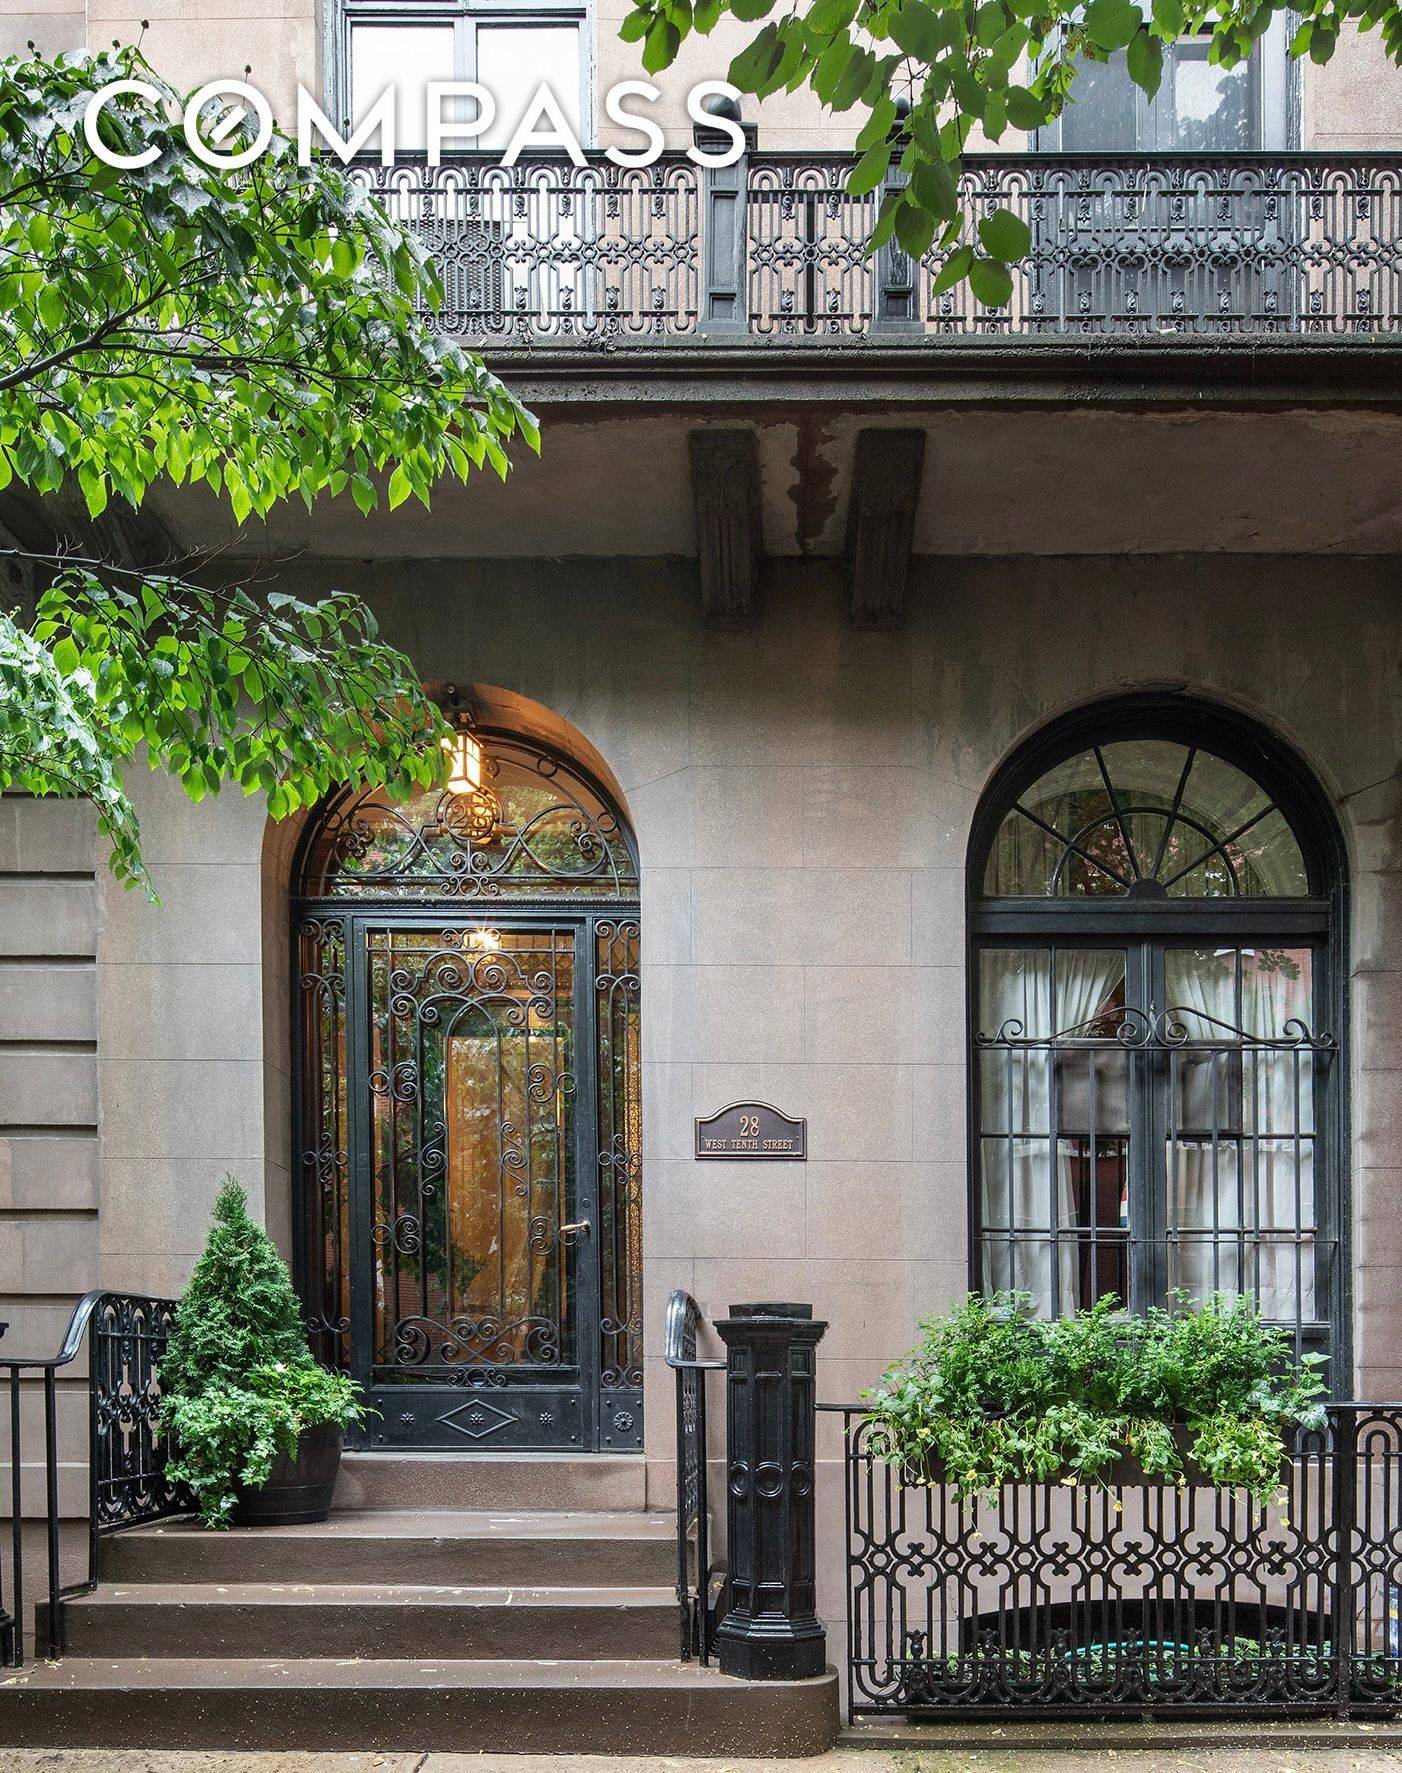 Greenwich Village Single Family Opportunity Historically Significant Brownstone Gold Coast 28 West 10th is one of the last remaining opportunities to restore a historically significant Renwick Brownstone to its former ...